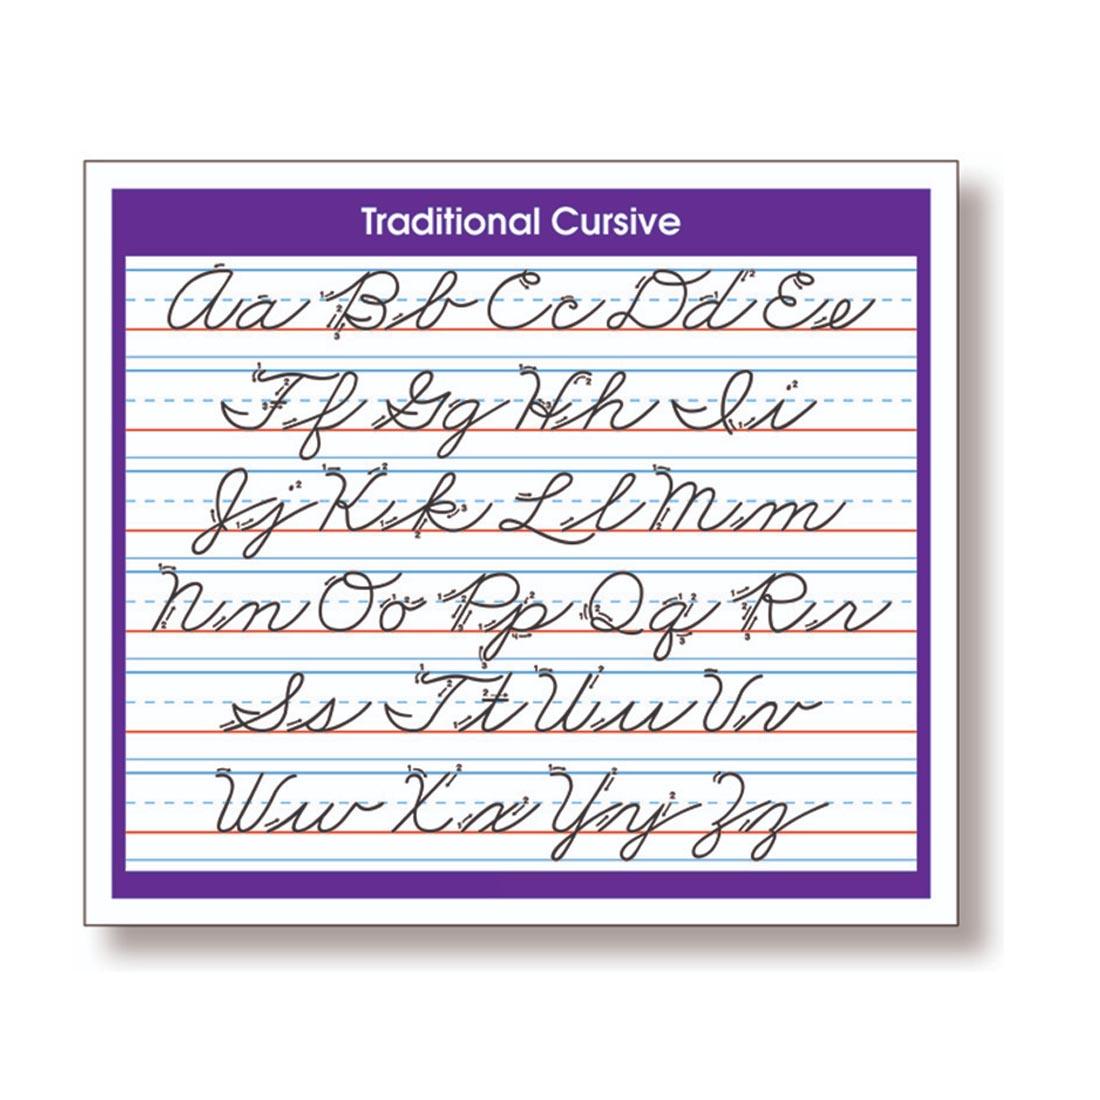 Adhesive Traditional Cursive Desk reference